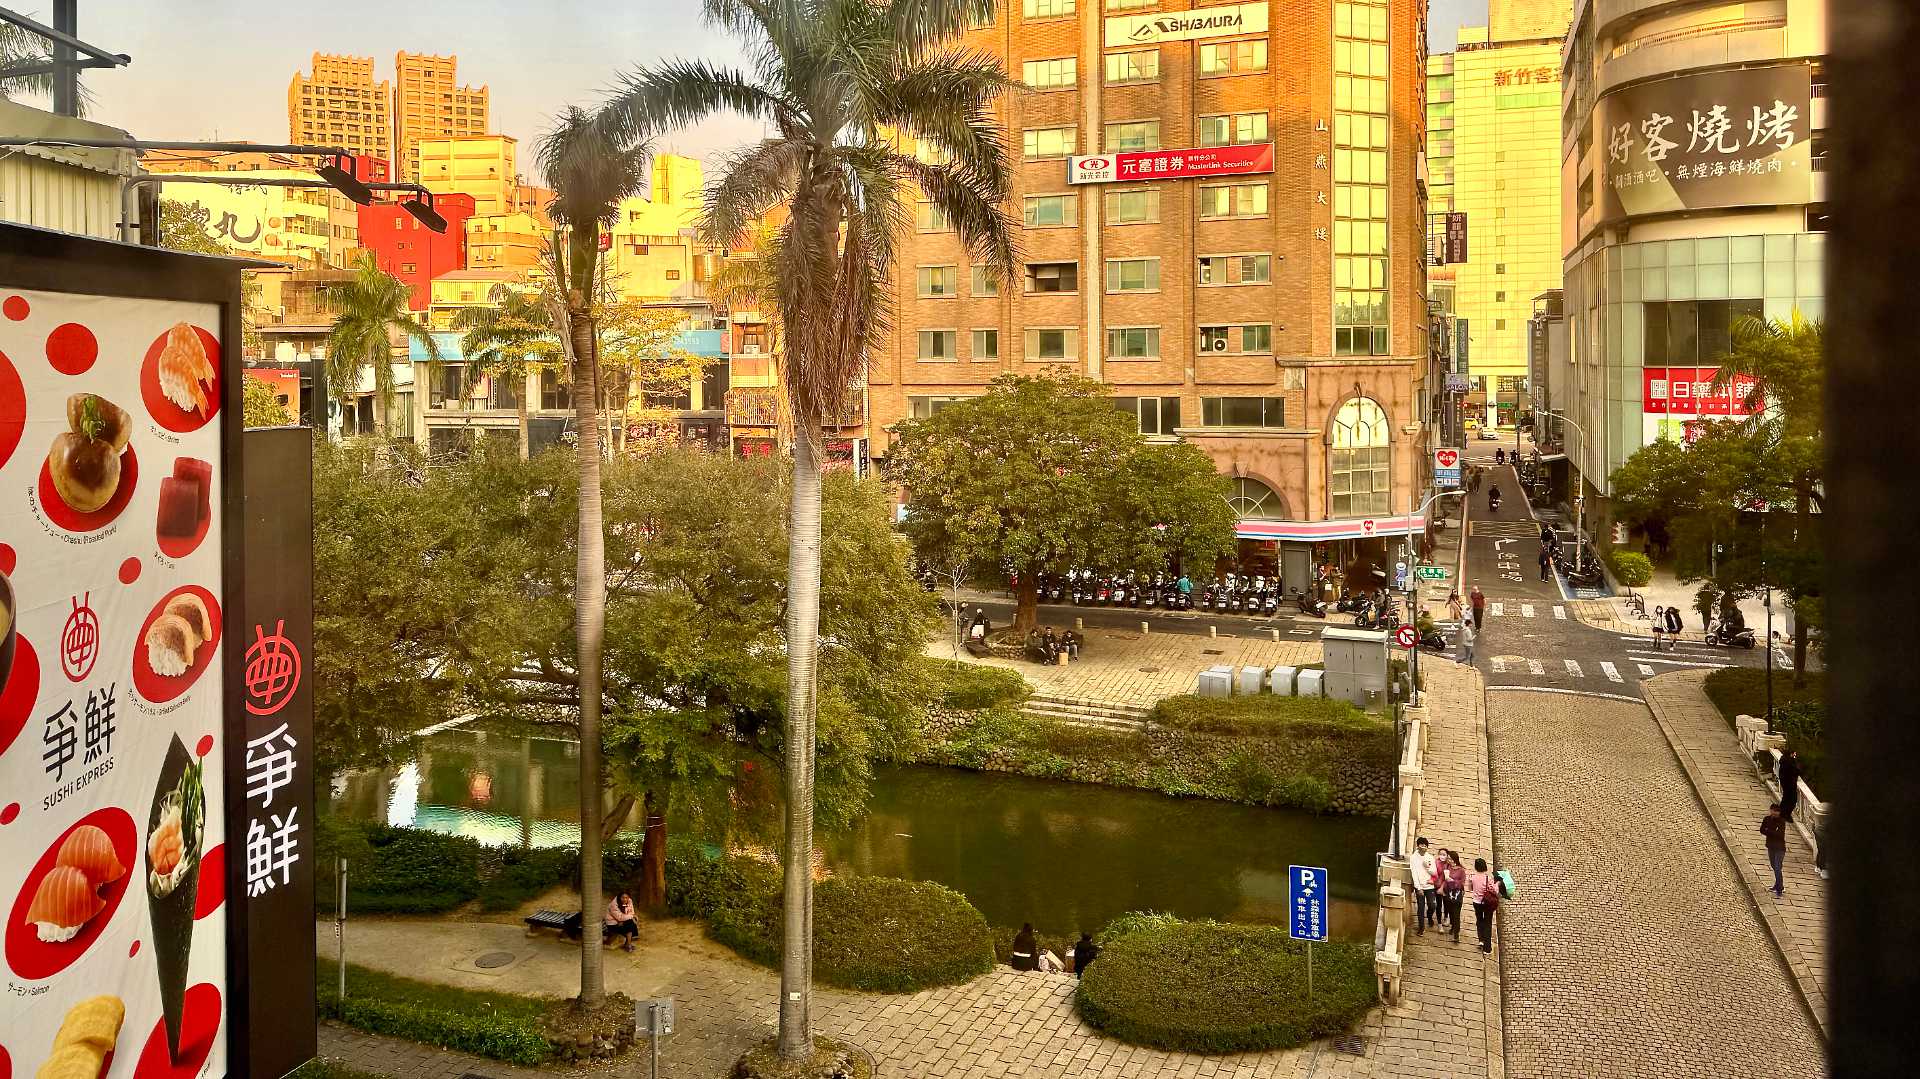 Photo of the center of Hsinchu city, showing a paved bridge across a canal lined with hedges and tall palm trees, with tall buildings in the distance.